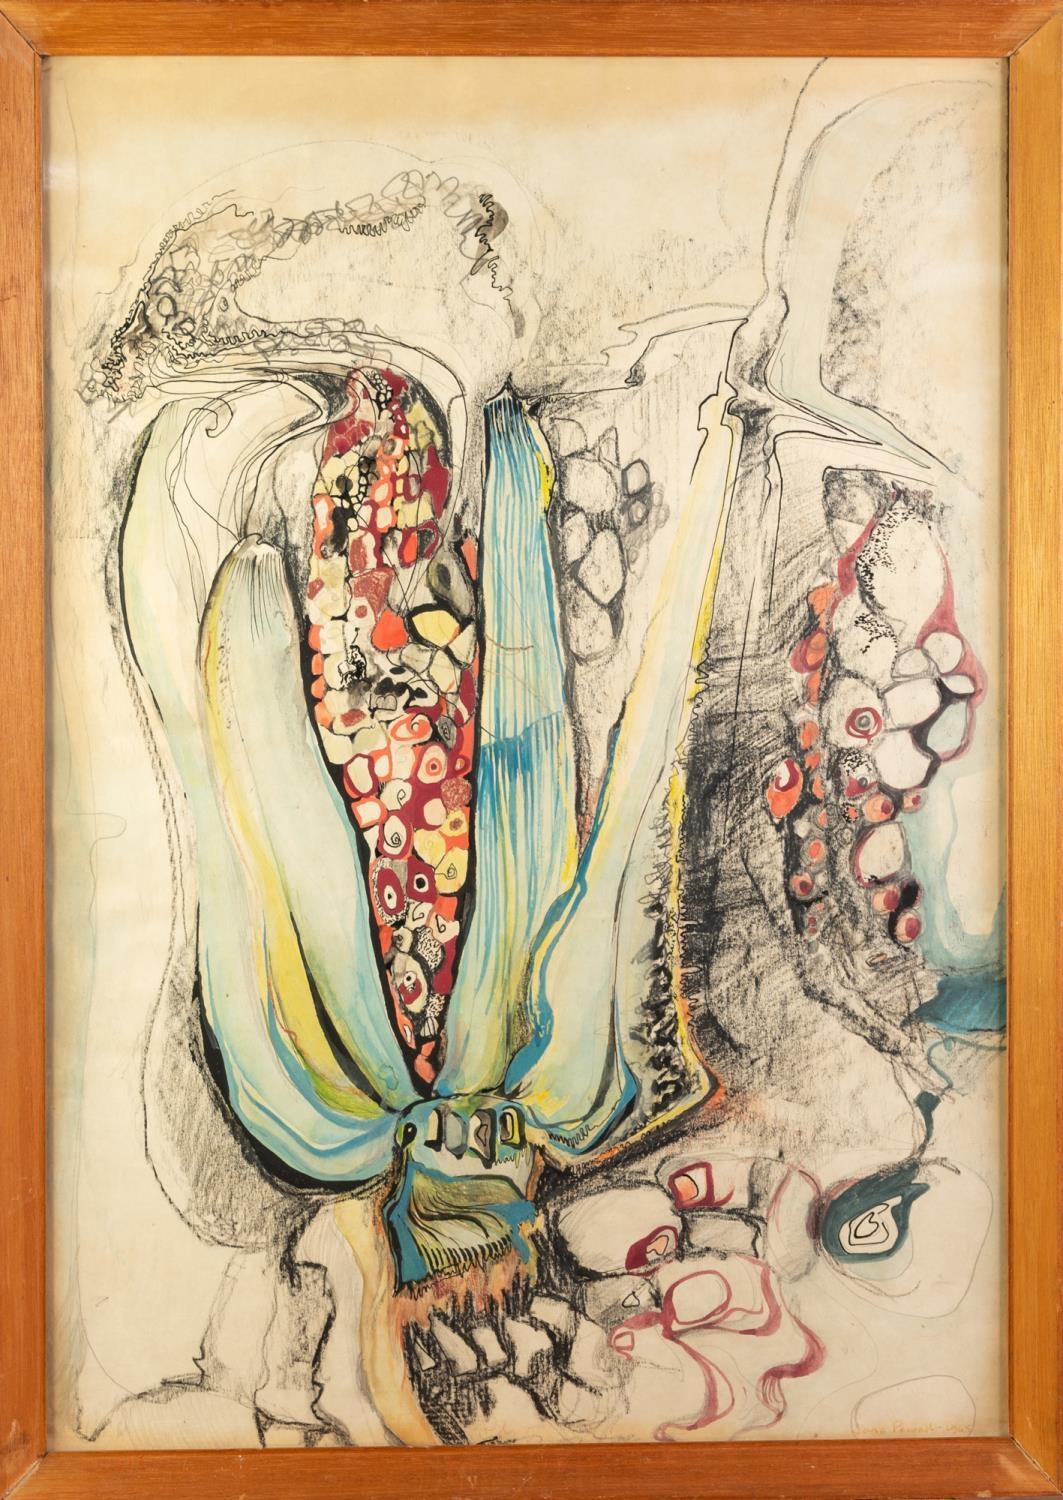 JANE POWELL (20th CENTURY) CHARCOAL, PENCIL, PEN, BLACK INK AND WATERCOLOUR DRAWING 'Sweetcorn' - Image 2 of 2